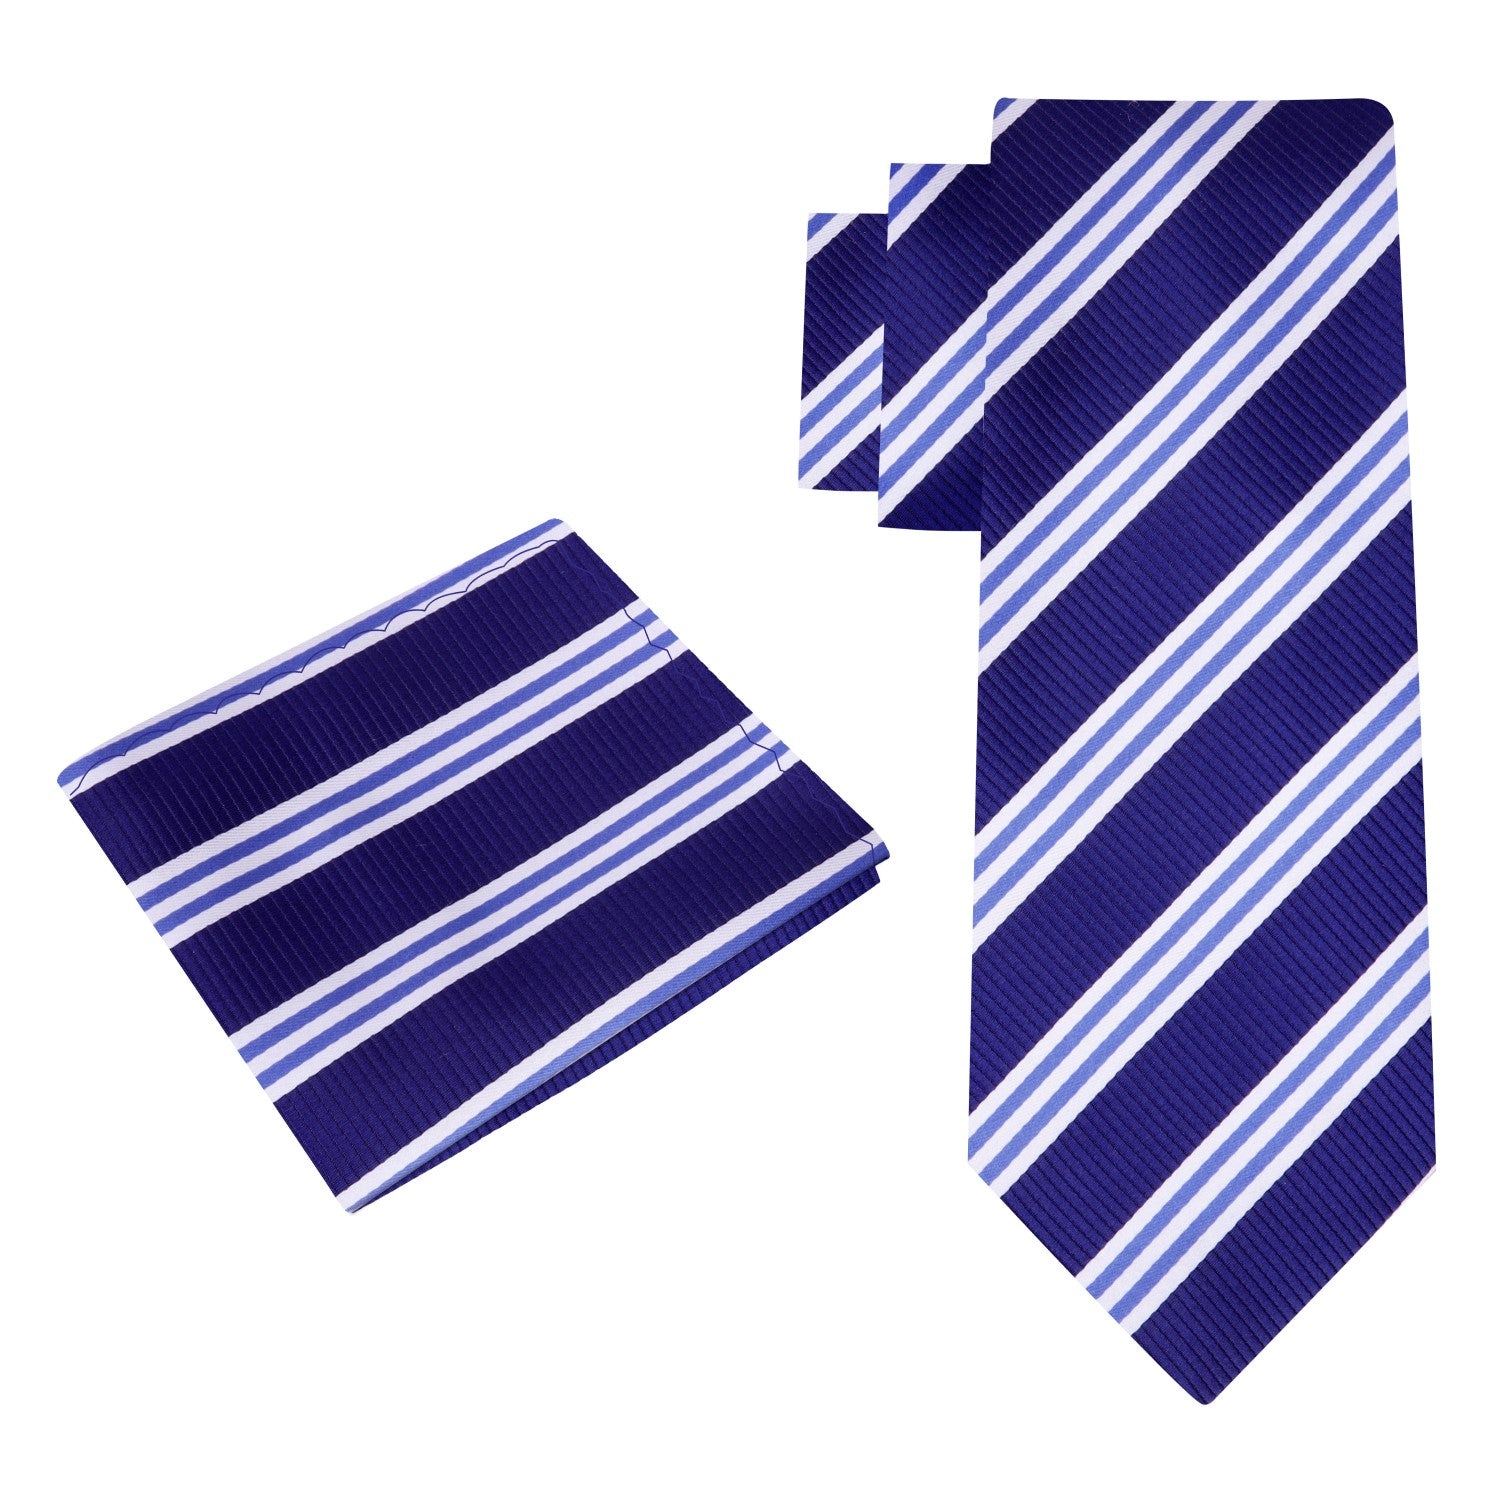 View 2: A Blue, Light Blue, White Stripe Pattern Silk Necktie, Matching Pocket Square||Blue with Light Blue, White